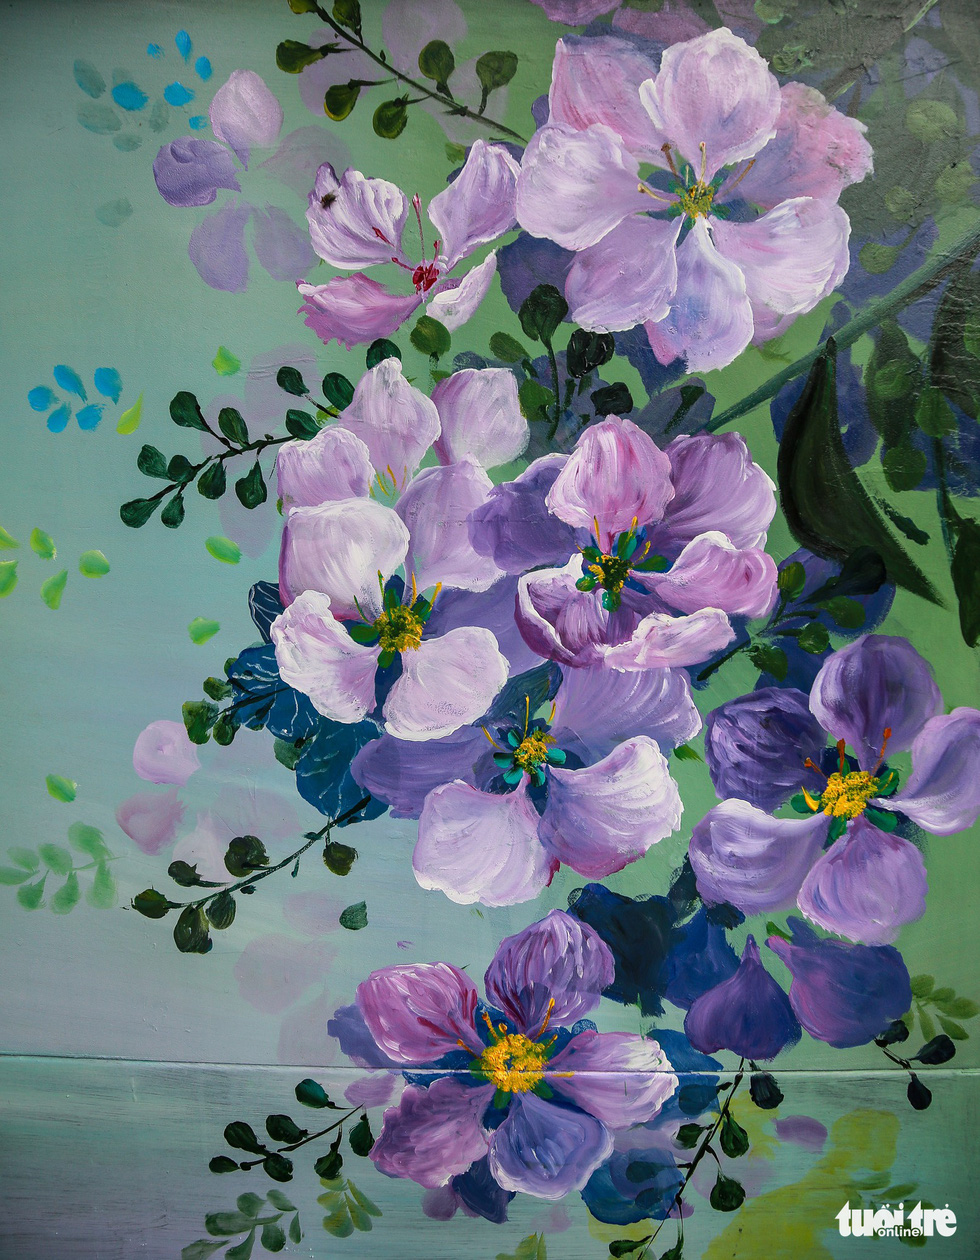 An electric cabinet is colored in floral patterns. Photo: Tuoi Tre